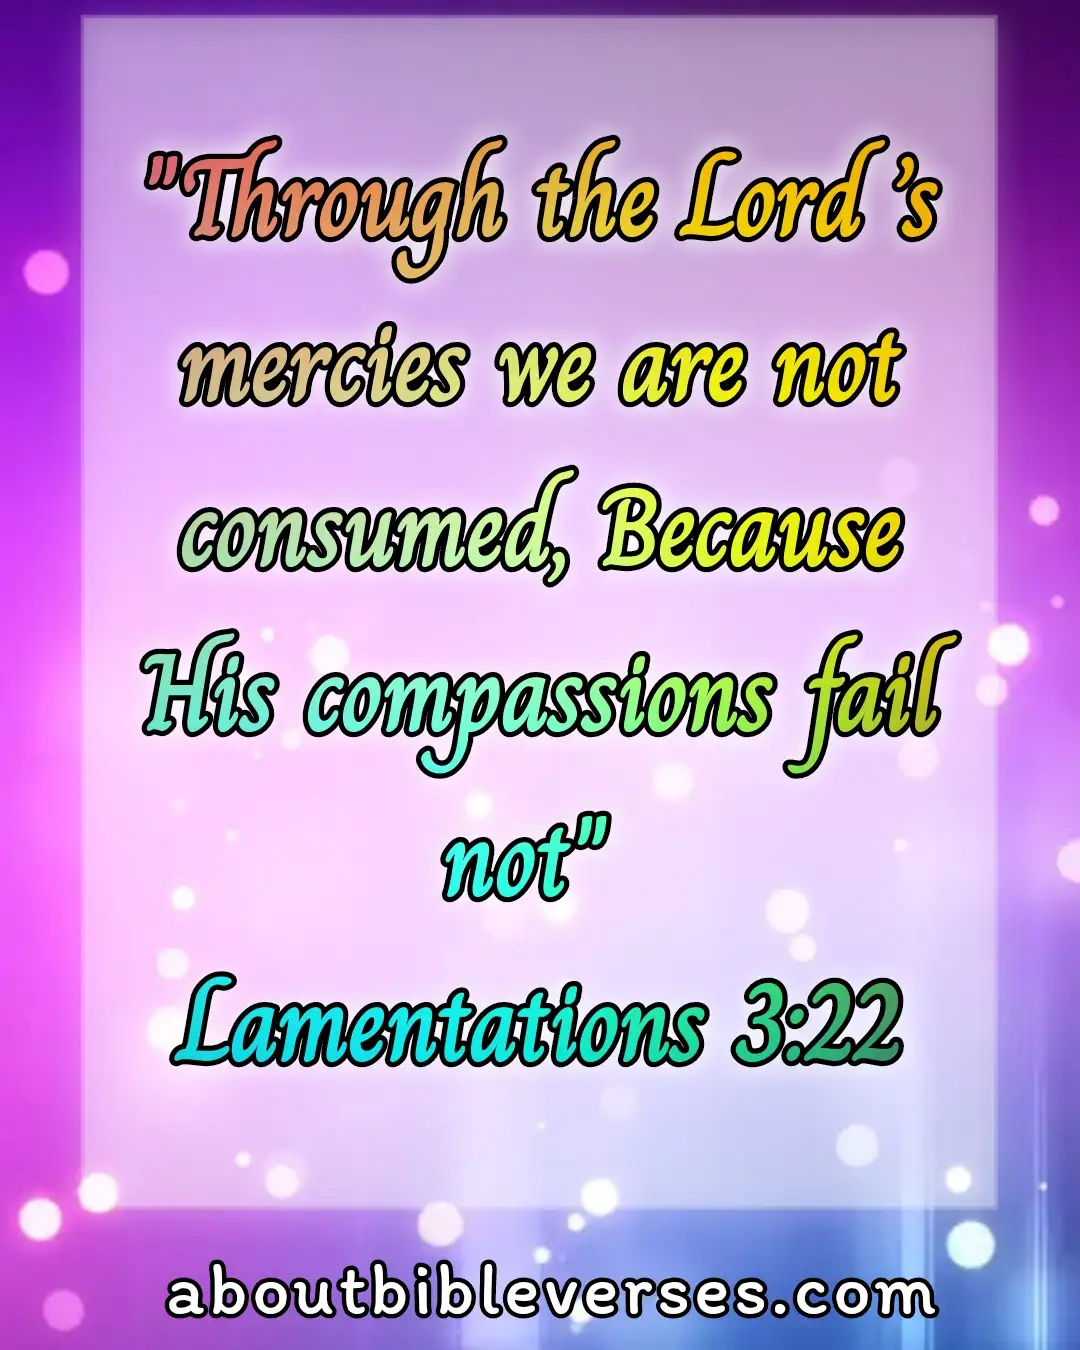 Bible Verses For College Students (Lamentations 3:22)